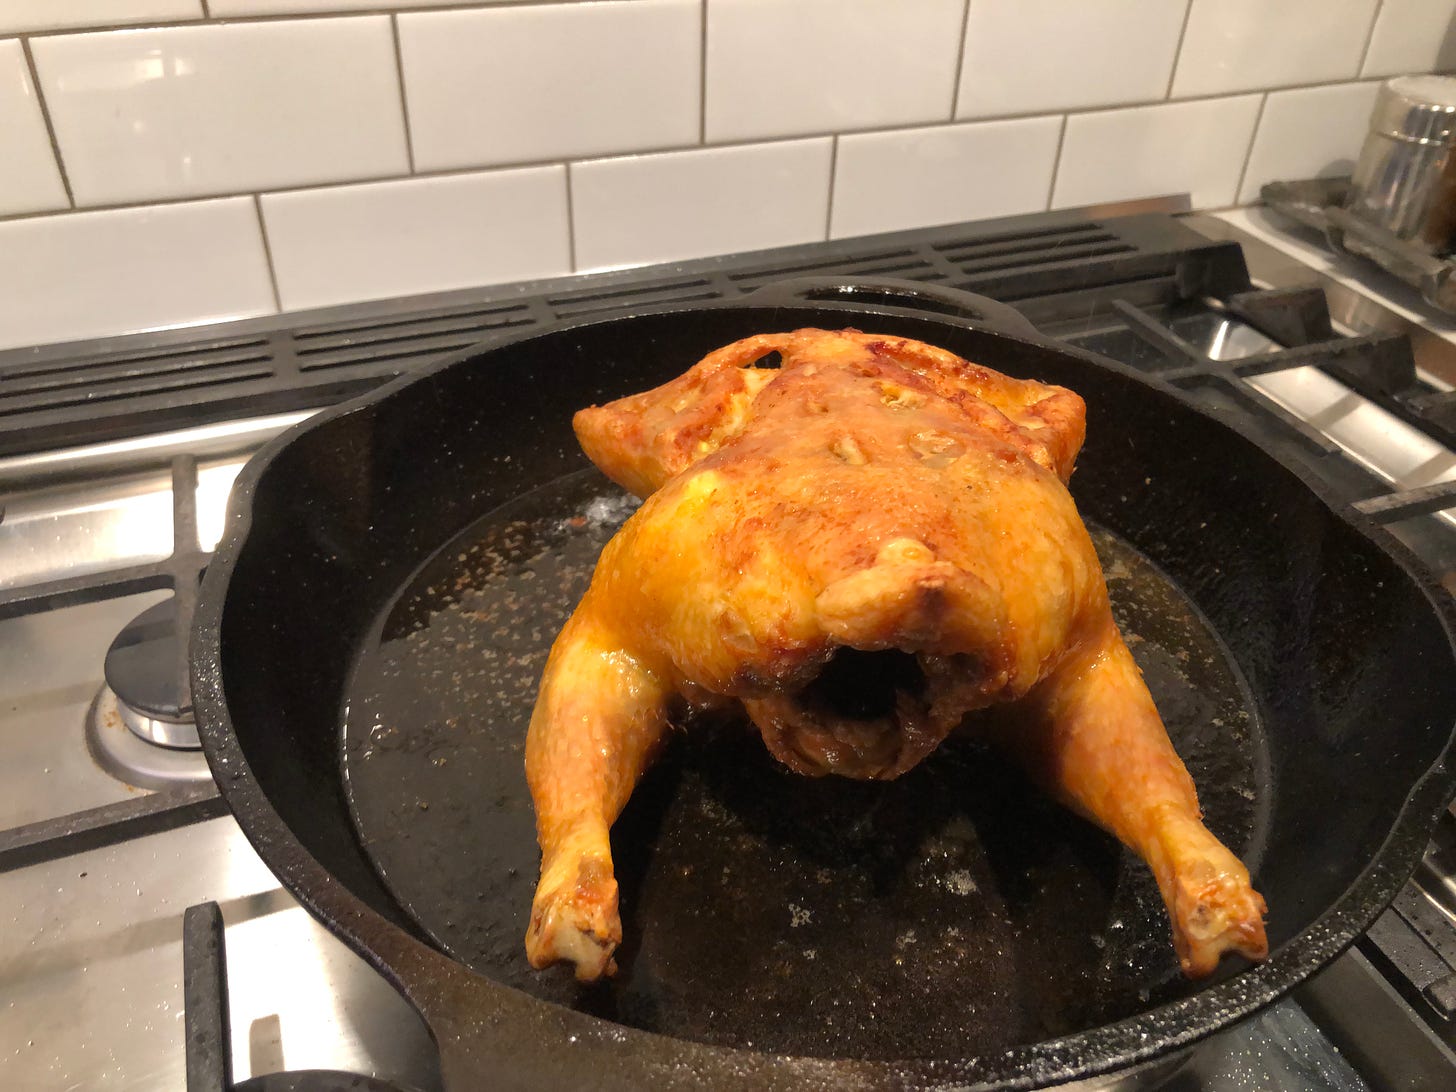 Chicken, now flipped breast-side down, in pan